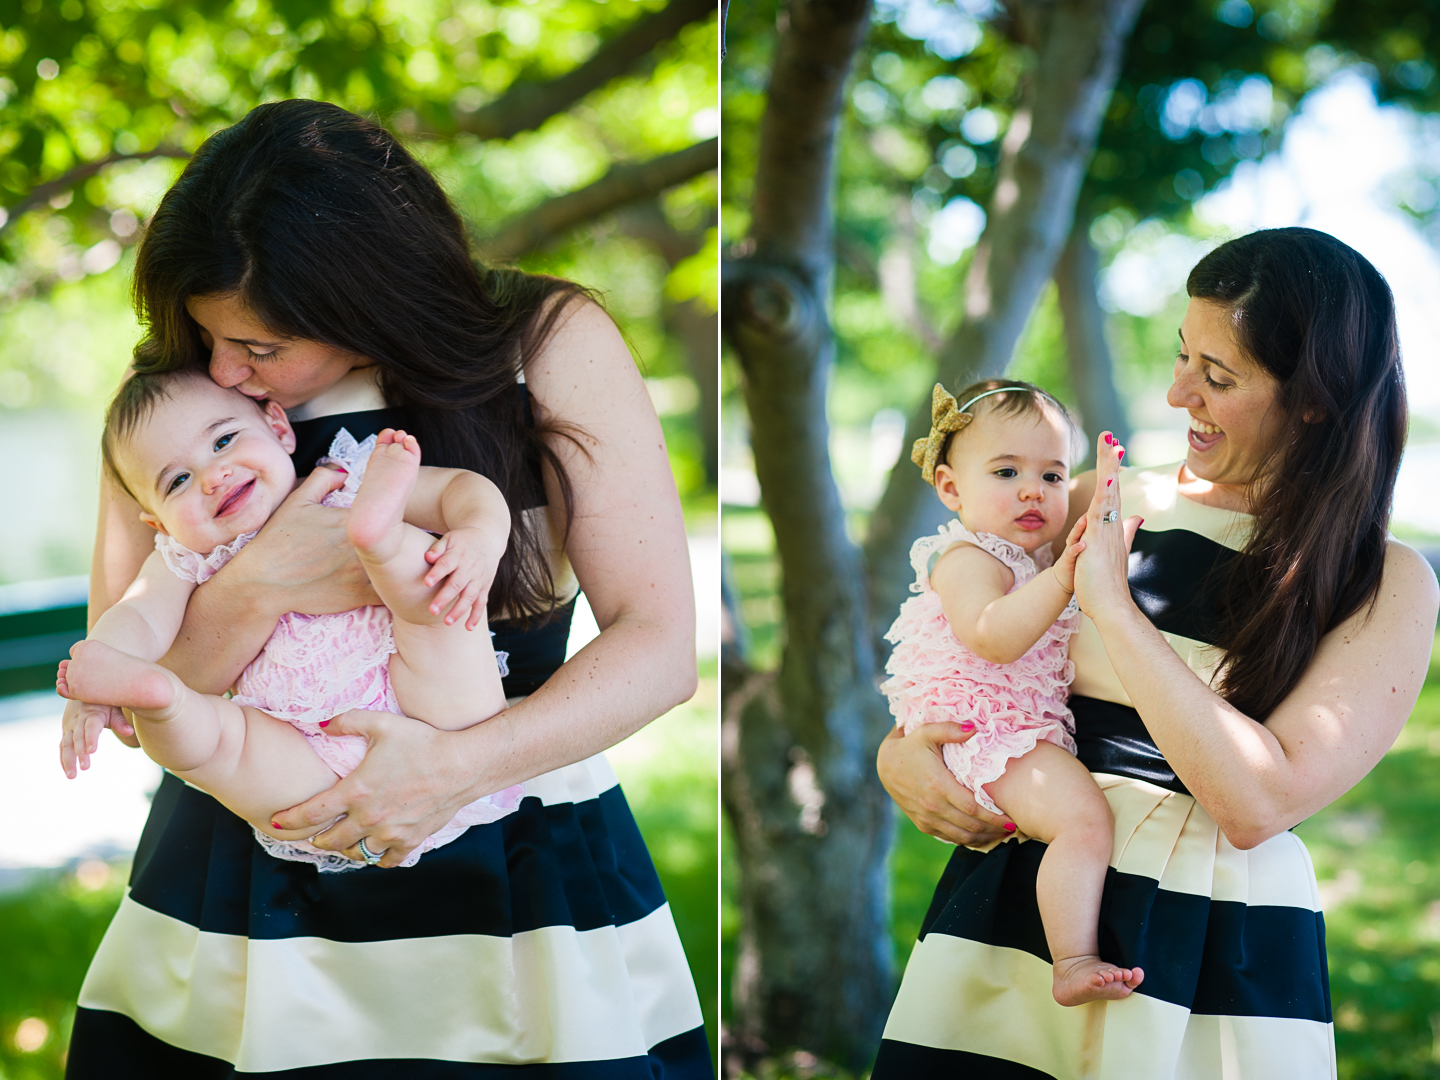 mom and her baby girl hugging for a photo during a lifestyle portrait session